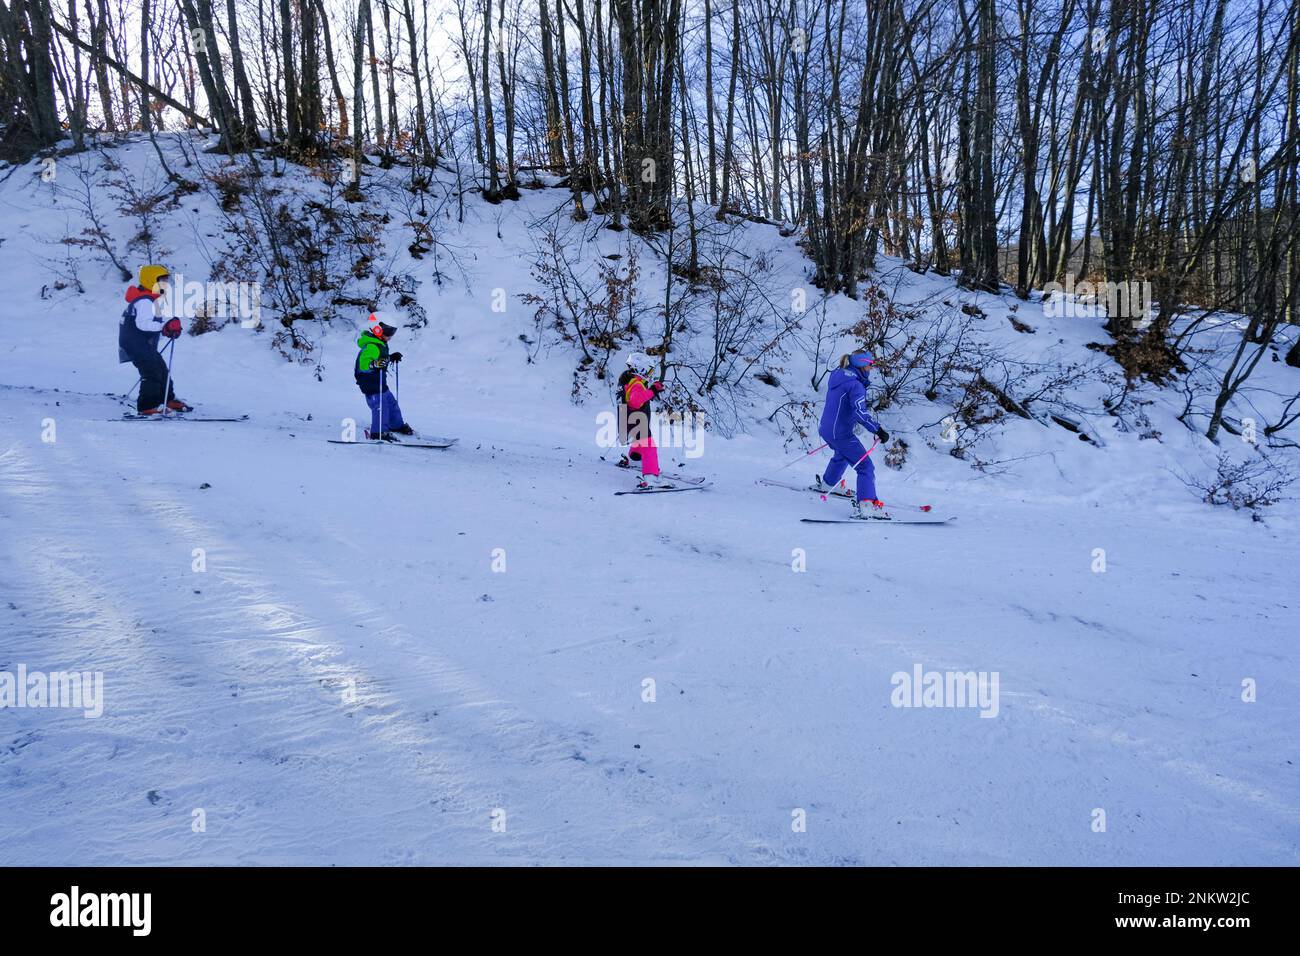 Kids in colorful ski suits skiing in the snowy mountains across the trees and sunlight. Stock Photo